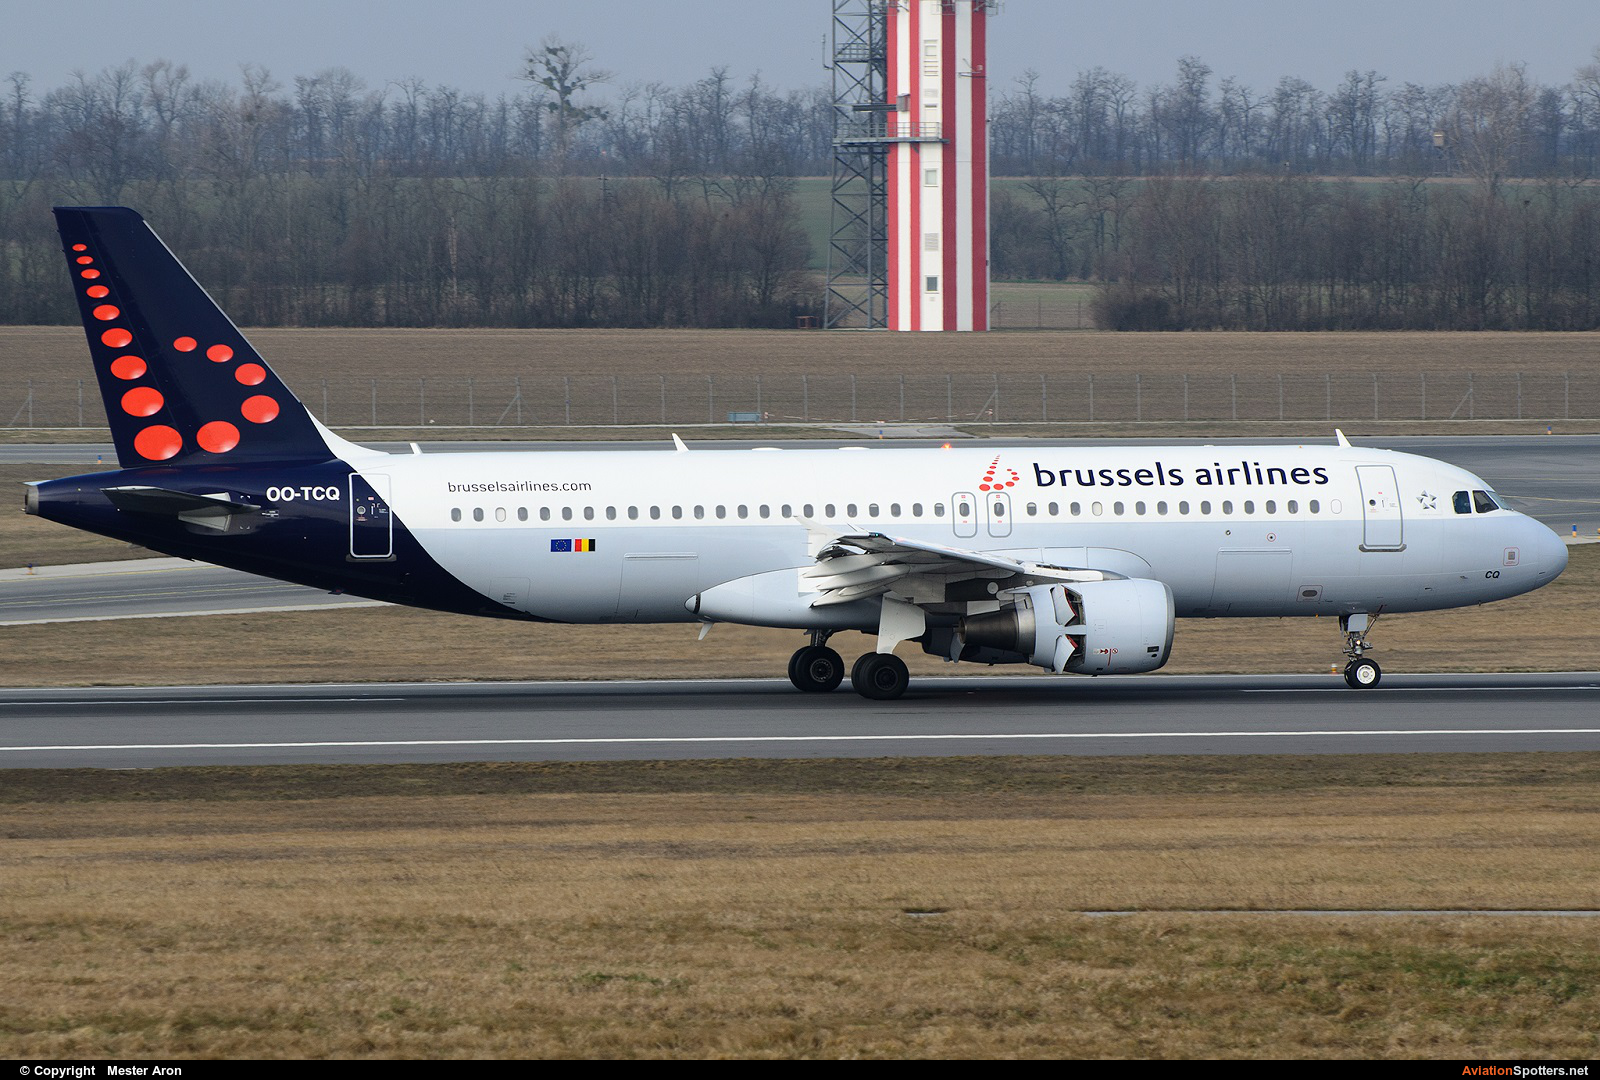 Brussels Airlines  -  A320-214  (OO-TCQ) By Mester Aron (MesterAron)